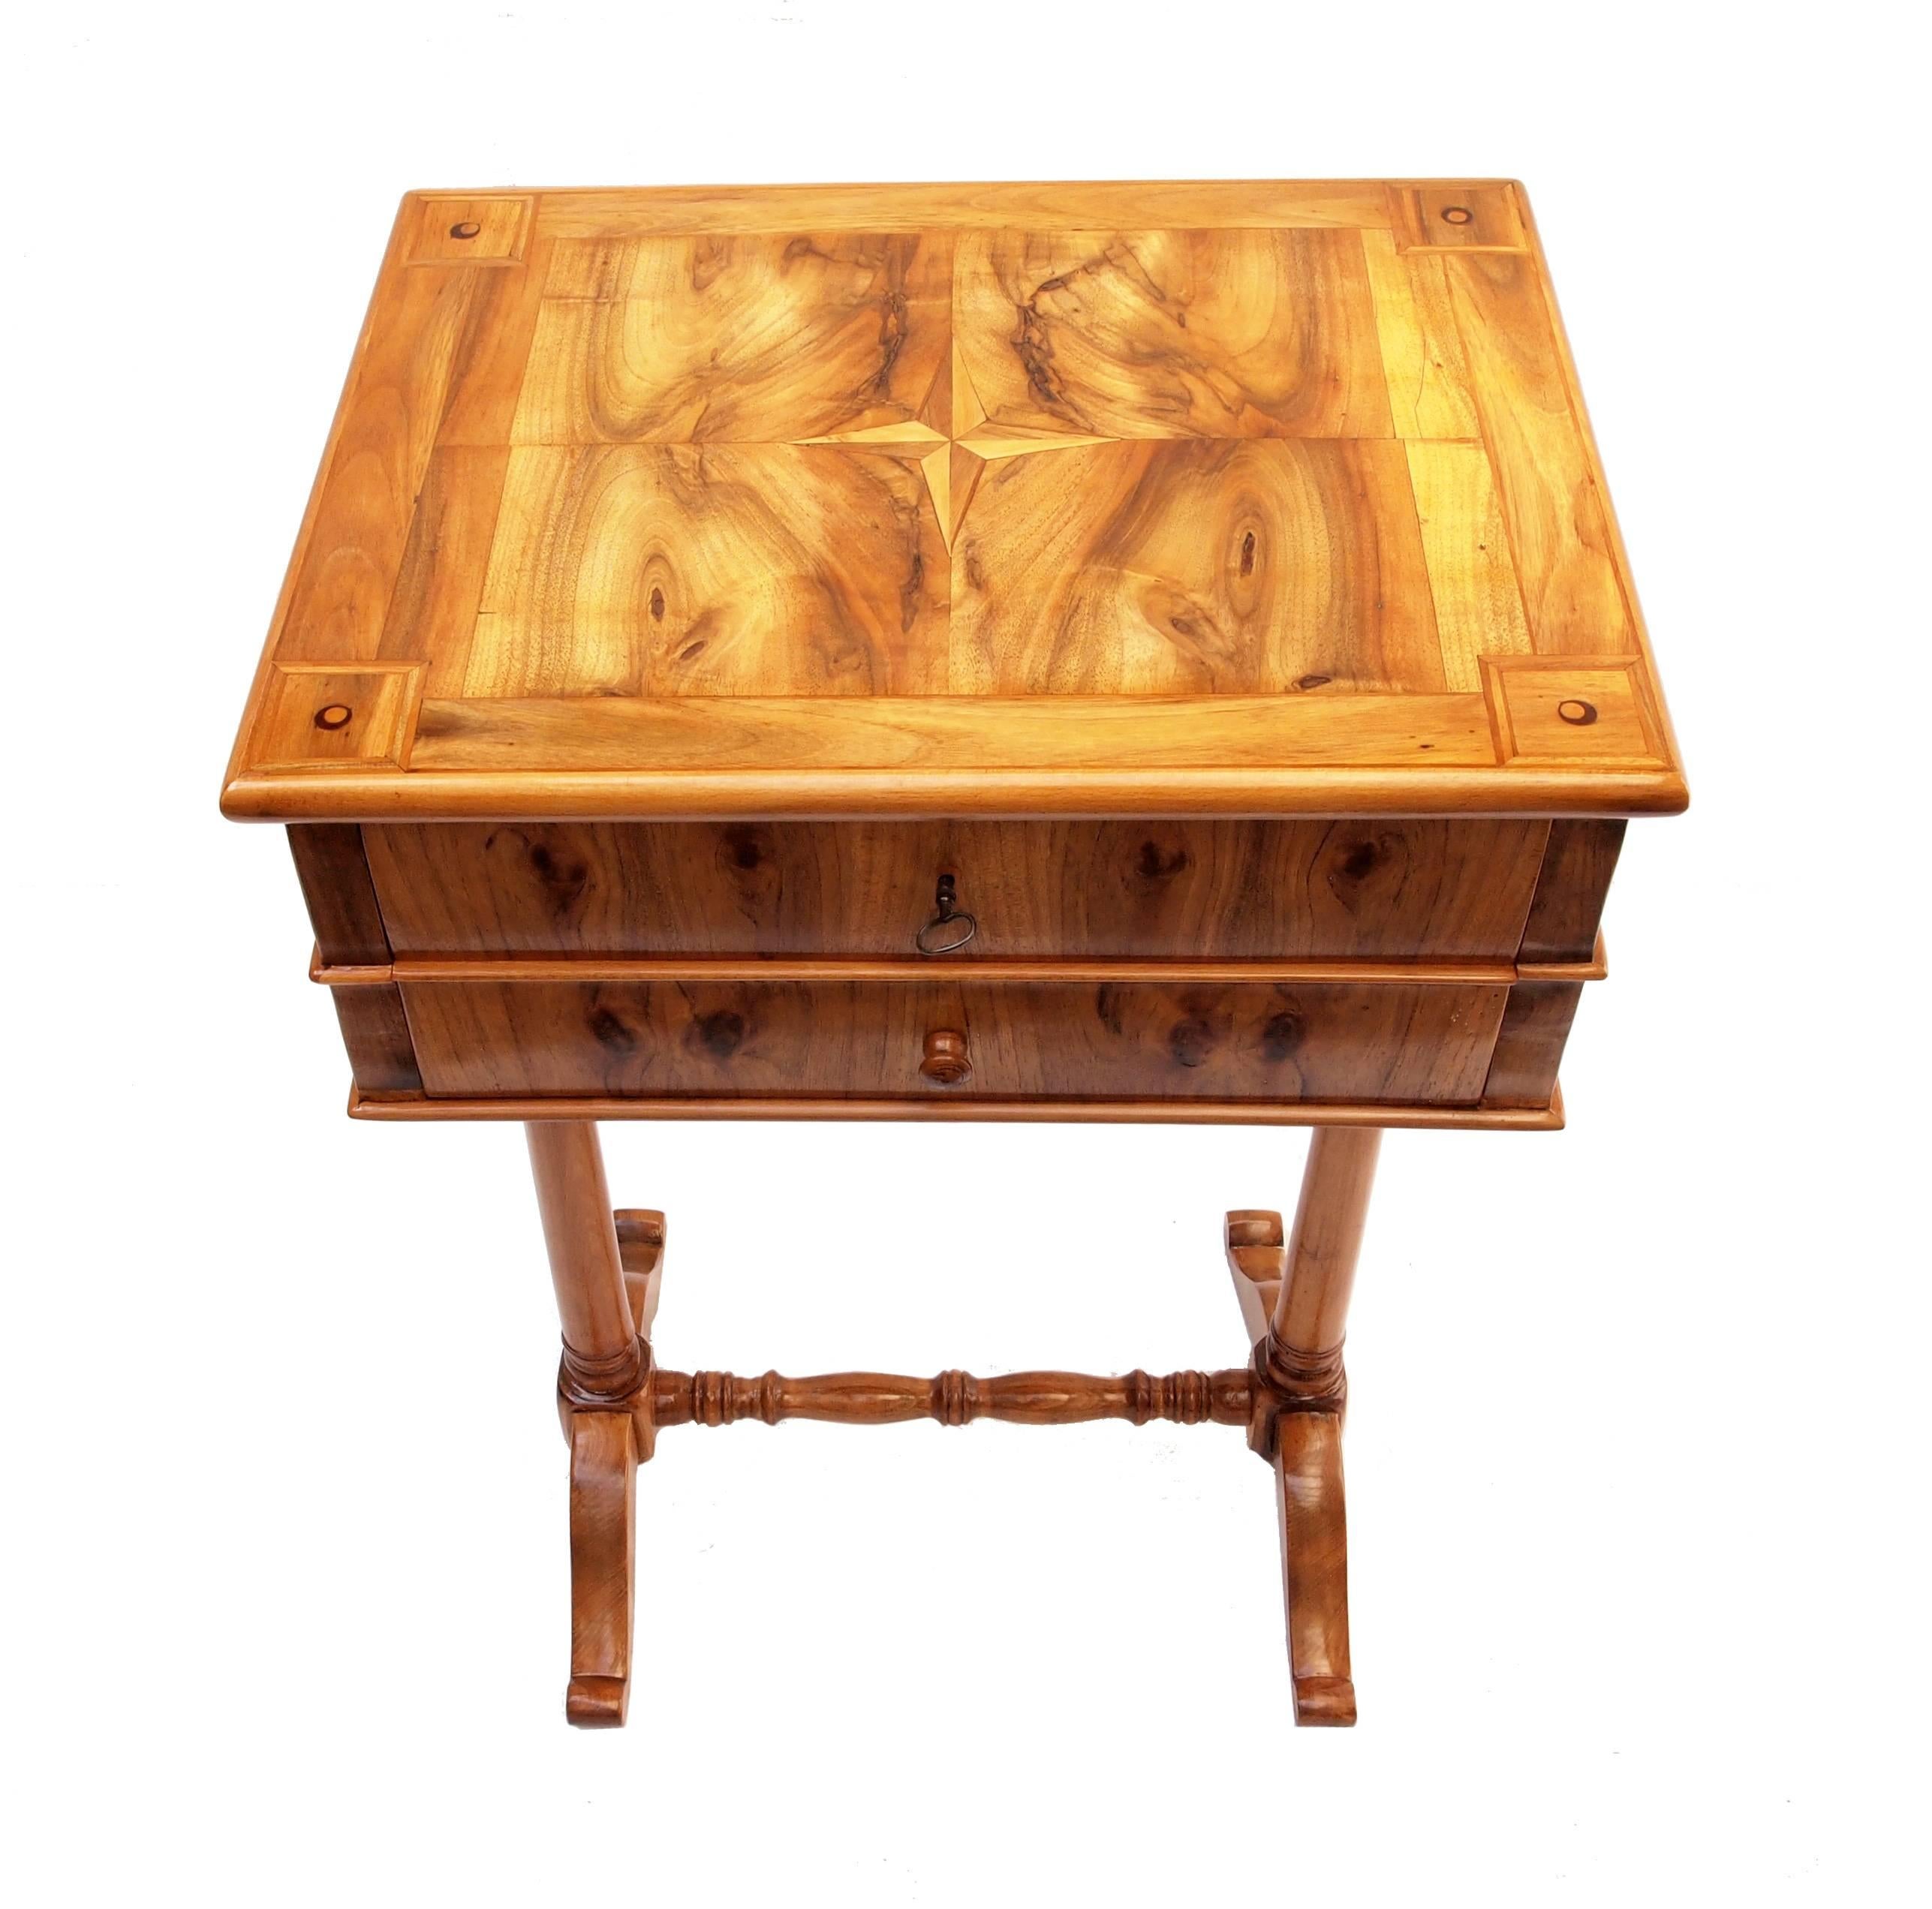 19th Century Biedermeier Walnut Sewing Table from Germany For Sale 1